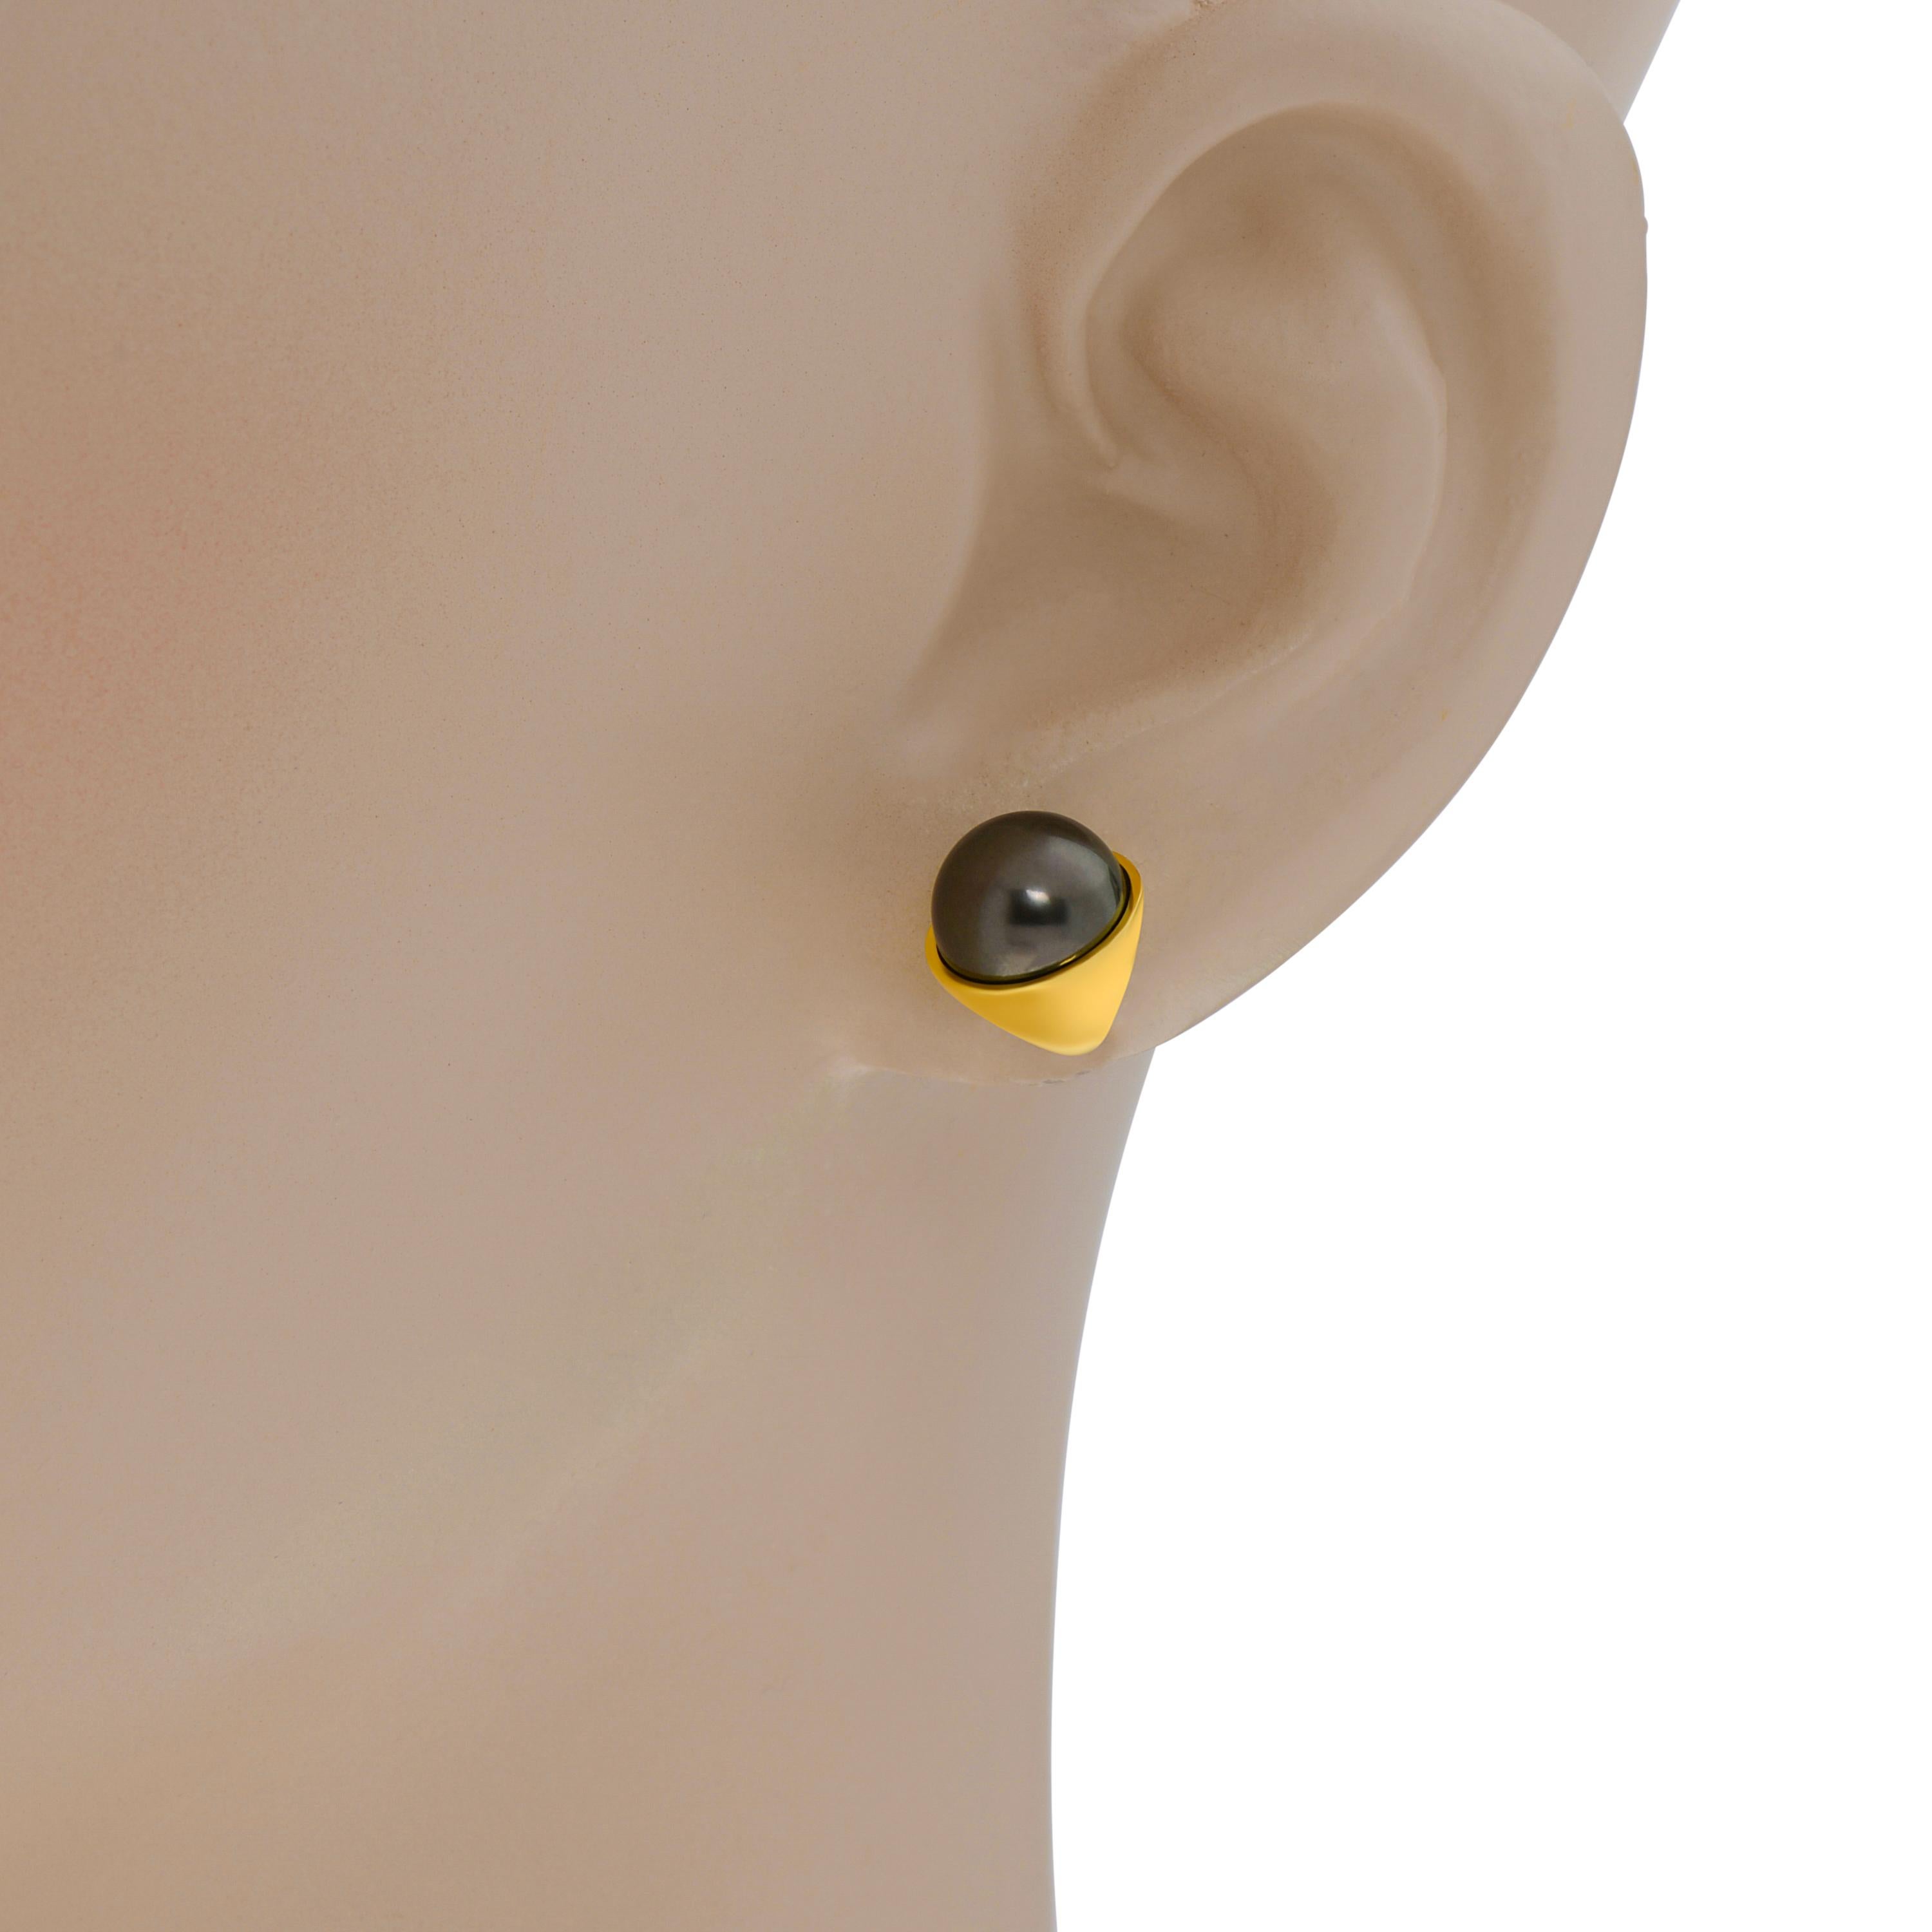 Assael 18K yellow gold single stud earring features an 8.5 - 8.75mm tahitian cultured pearl with a tapered setting. The decoration size is 3/8